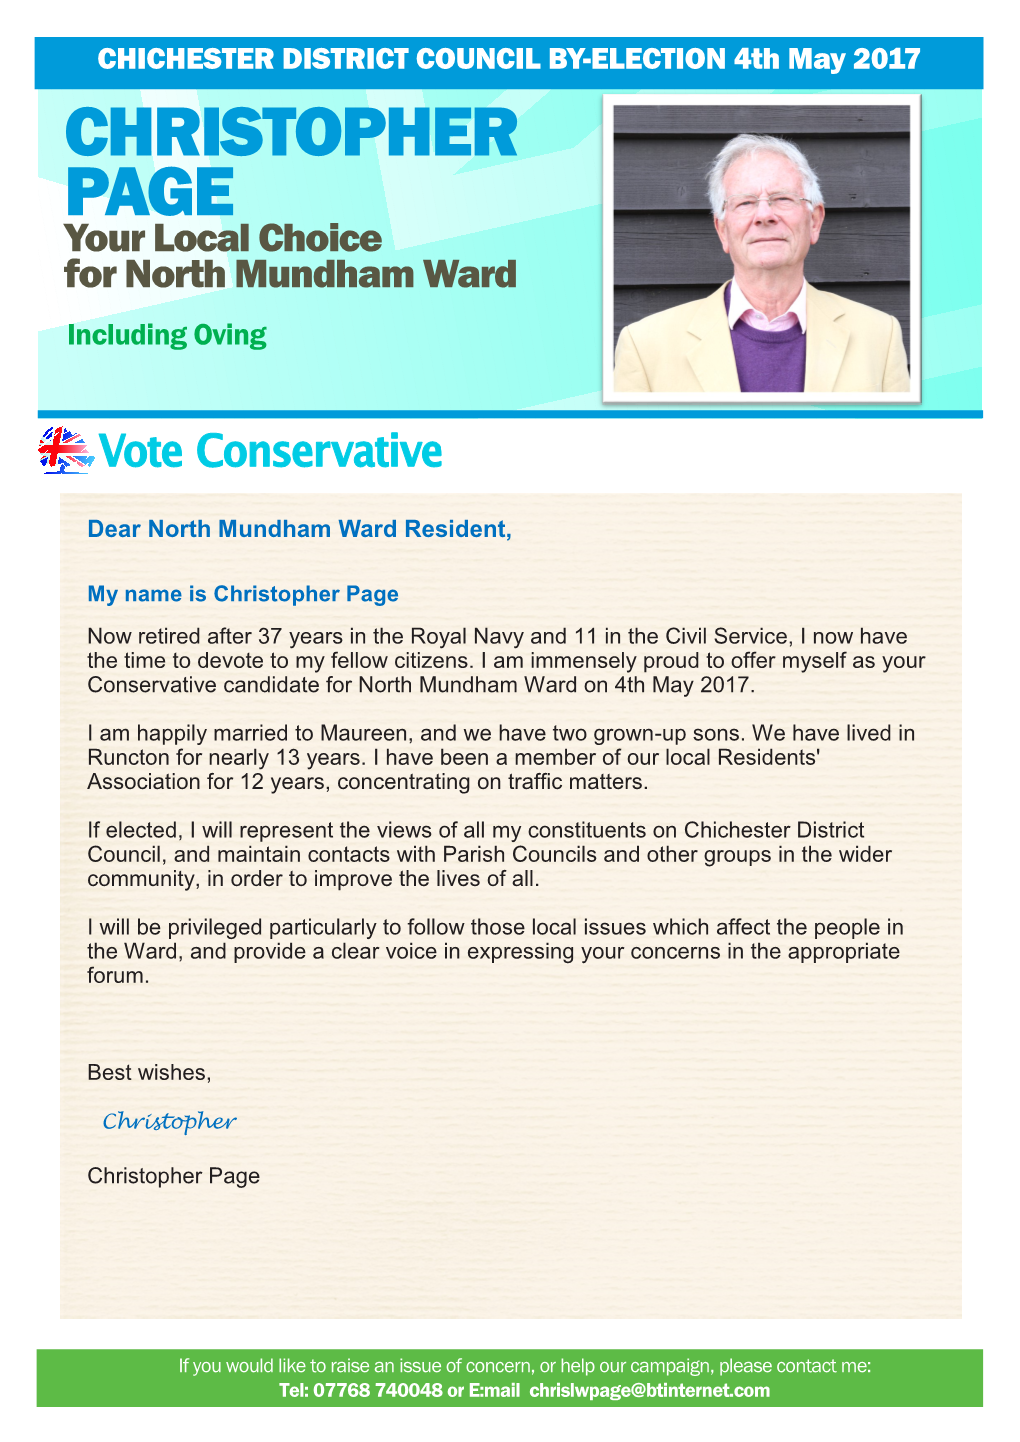 CHRISTOPHER PAGE Your Local Choice for North Mundham Ward